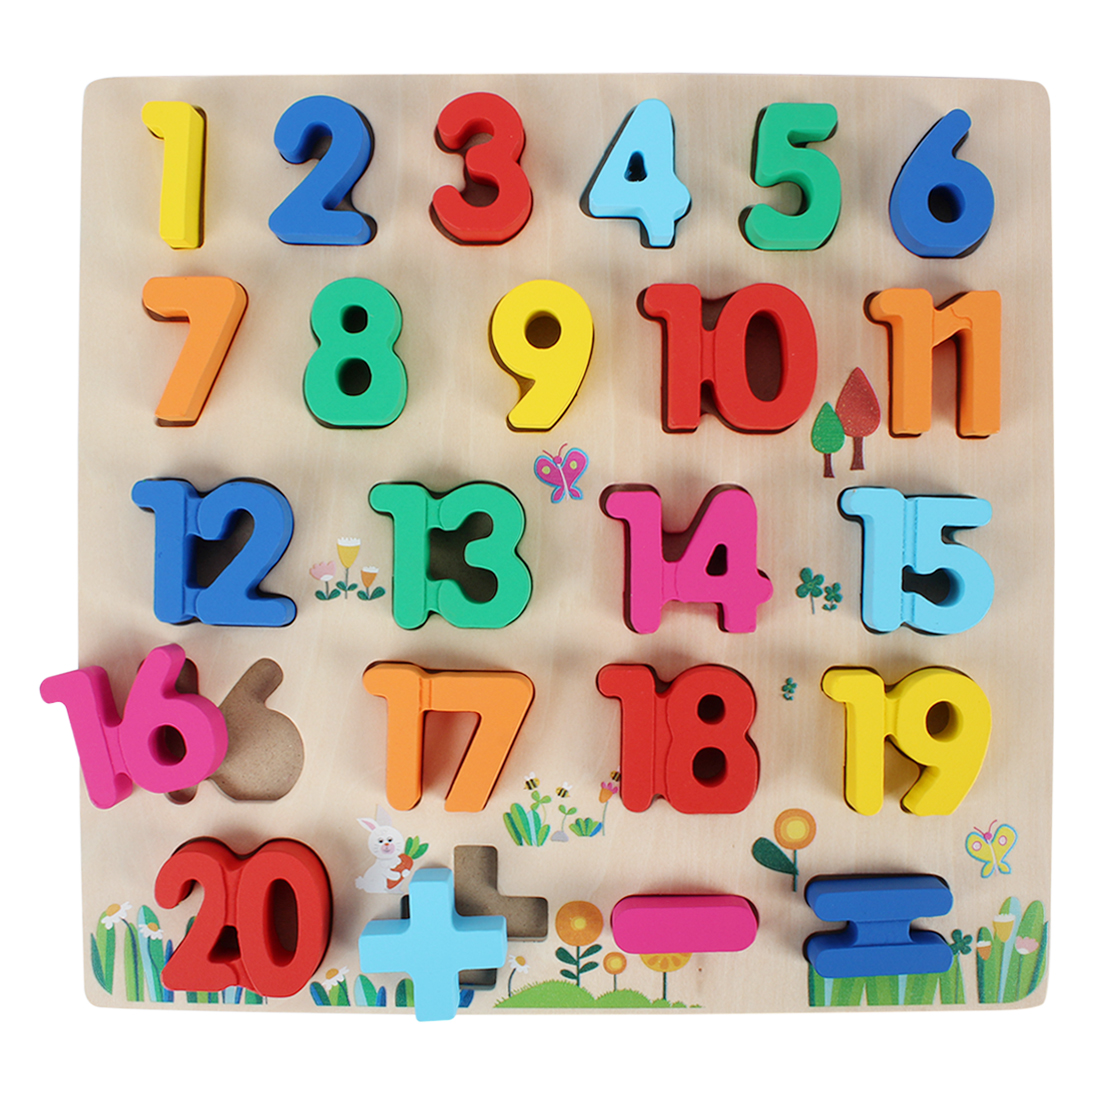 DSY0007-DESIYA,Knob puzzle , Jigsaw puzzle, Chunky puzzle, Other fun puzzle, Cube puzzle, Puzzle in the box,Wooden Block ,Marble Run,Doll House,Kitchen set, wooden outdoor